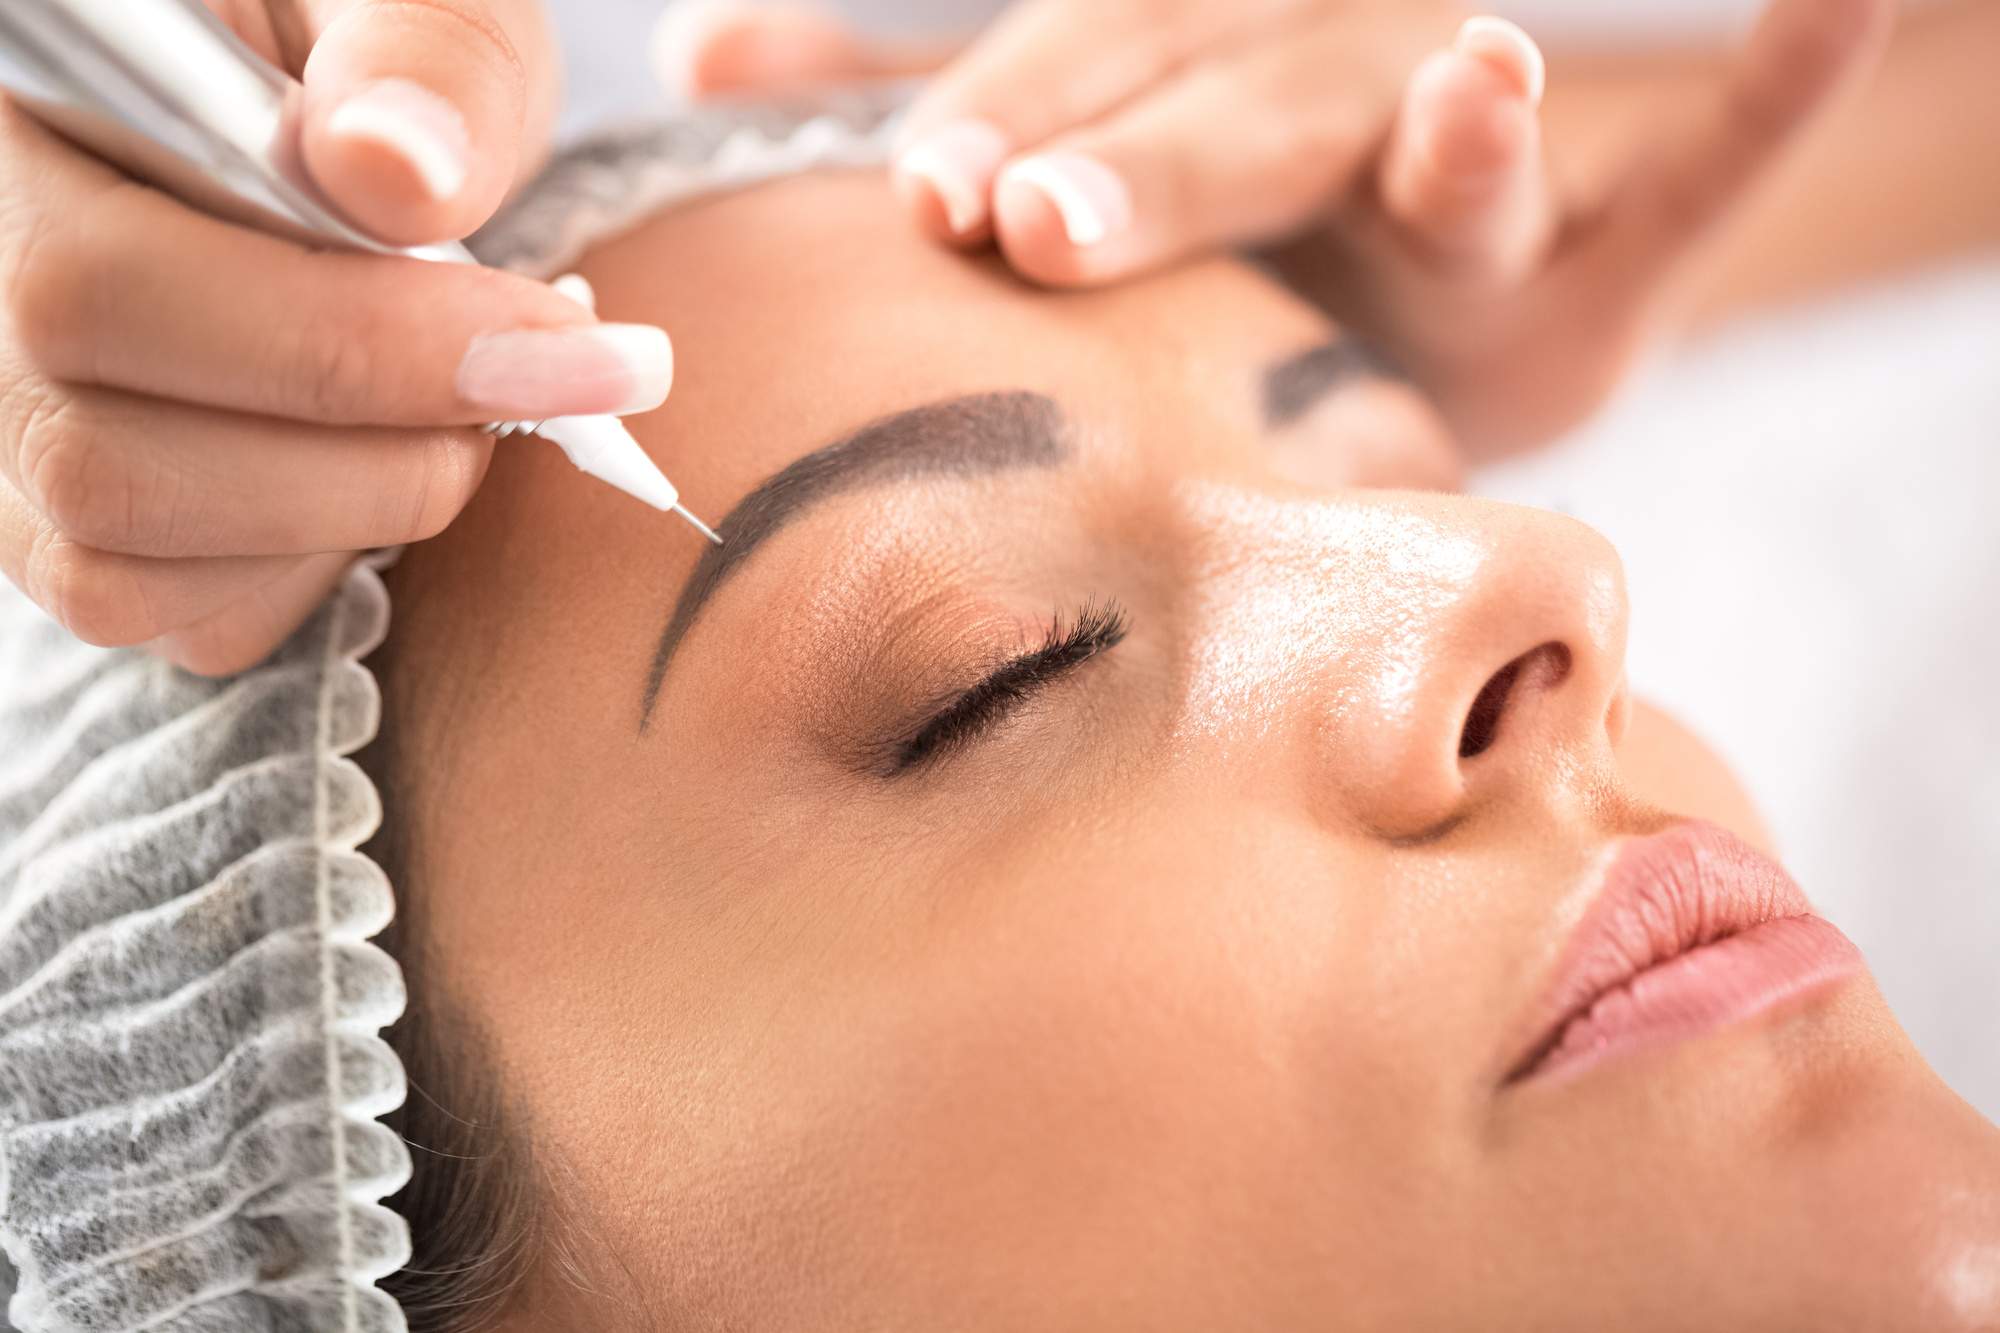 Microblading vs Microneedling: What Are the Differences?